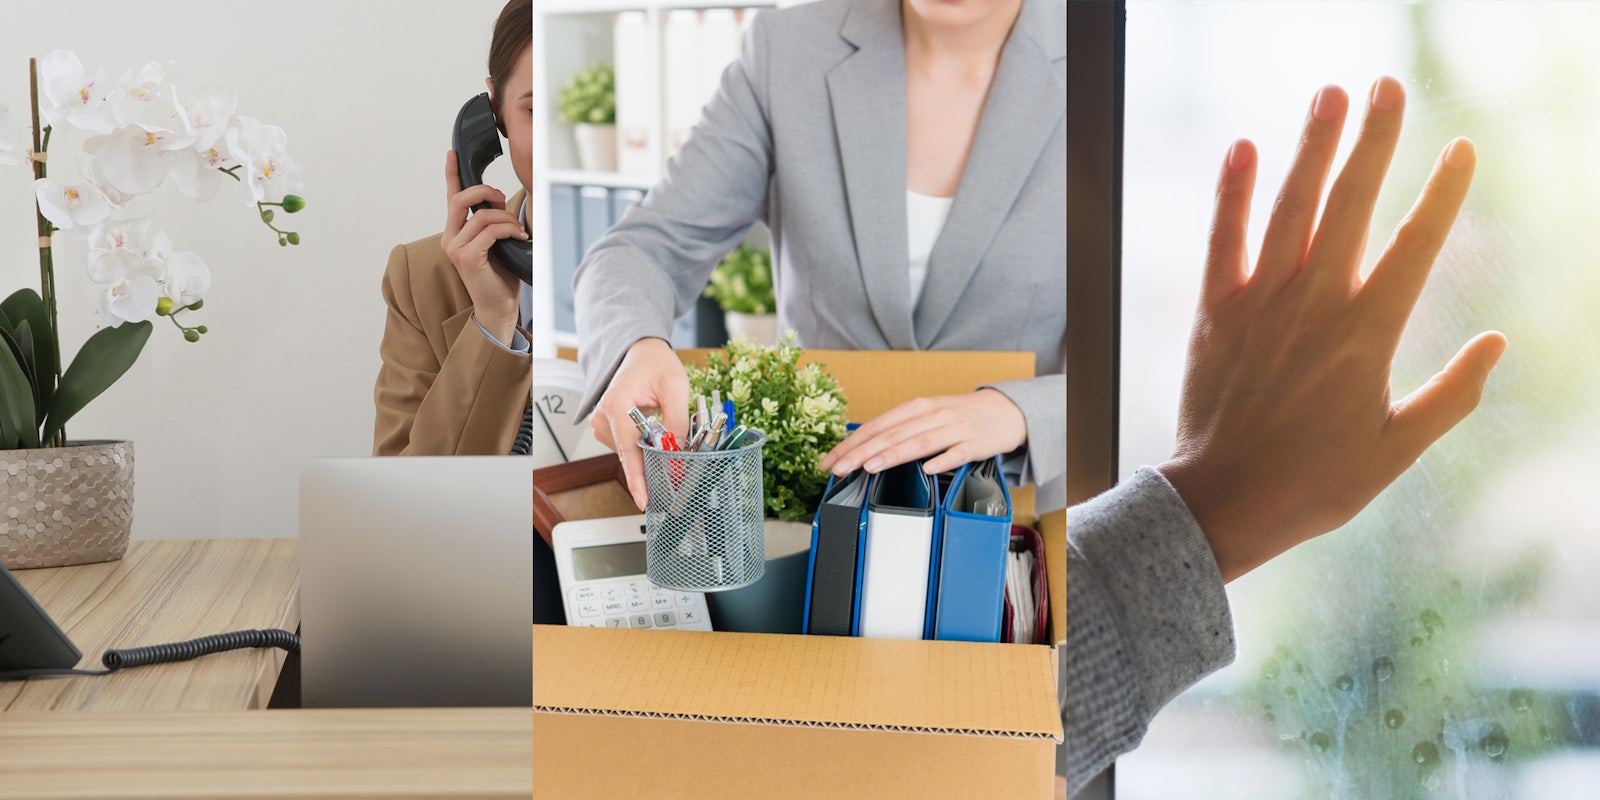 receptionist on phone in office (l) office woman moving items into box (c) woman hand on window (r)